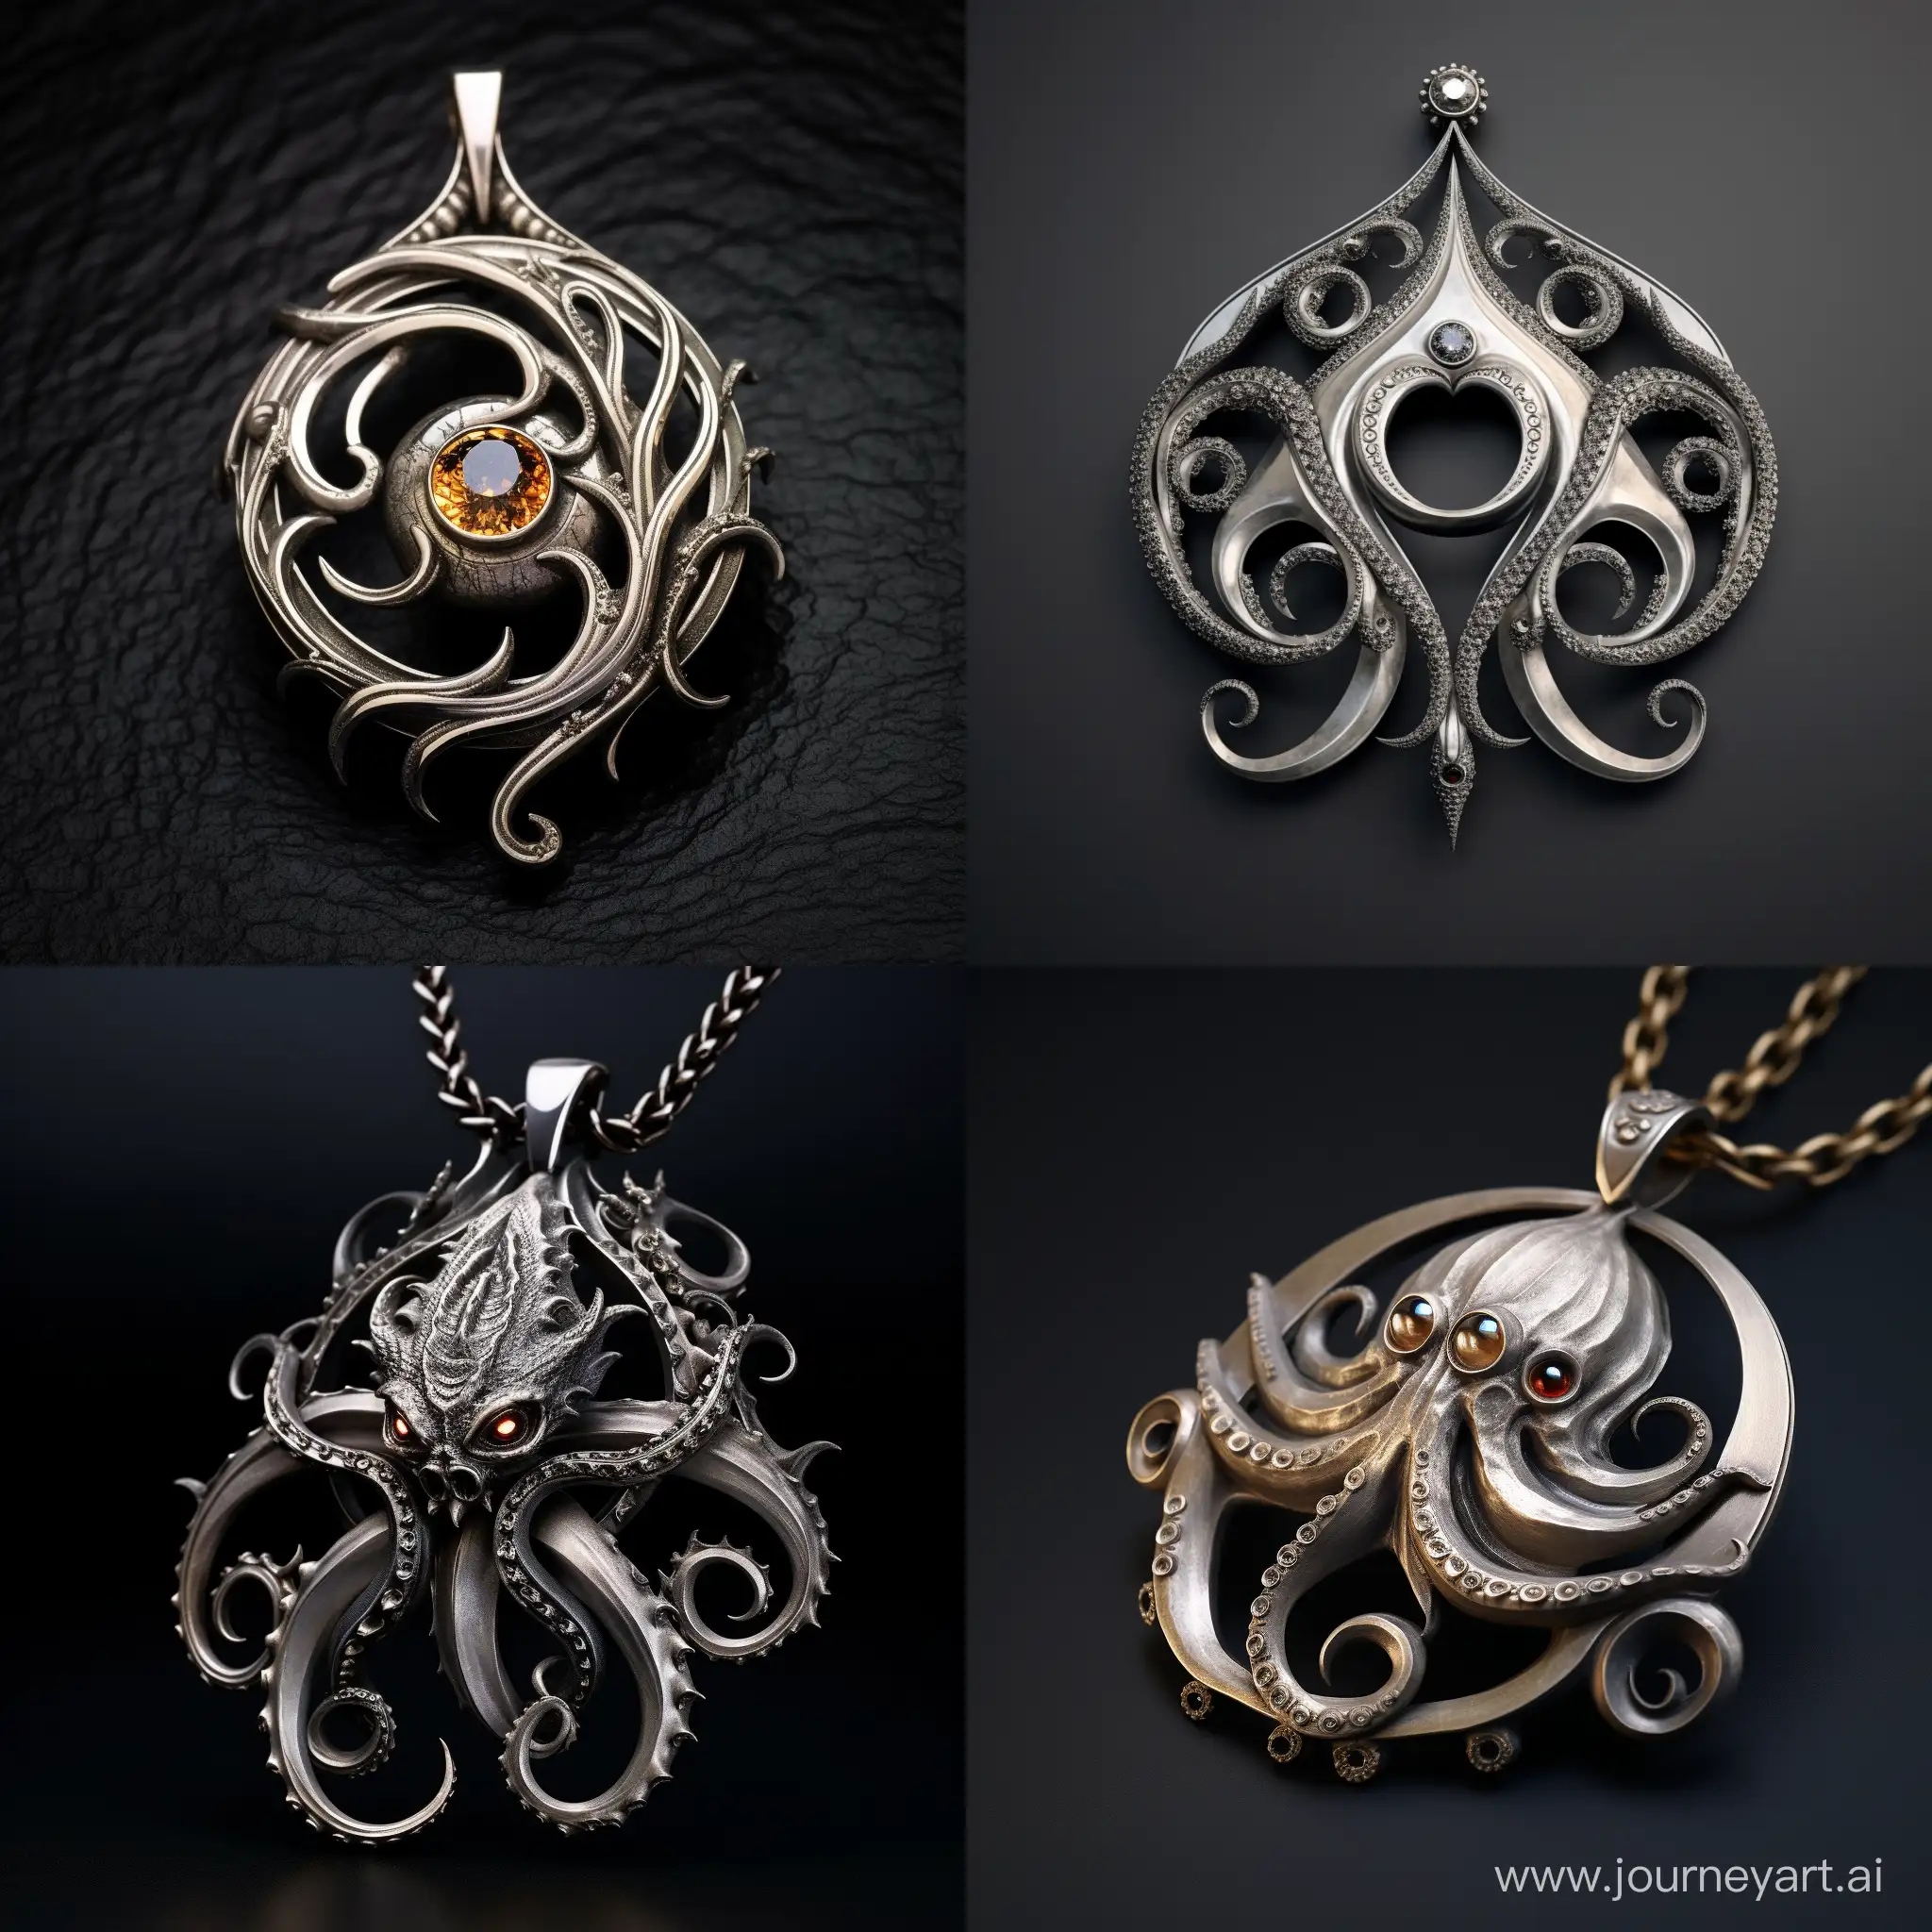 A silver pendant in the shape of a wheel, the edge of the pendant represents intertwined tentacles of an octopus and the center of the pendant is an eye on fire.